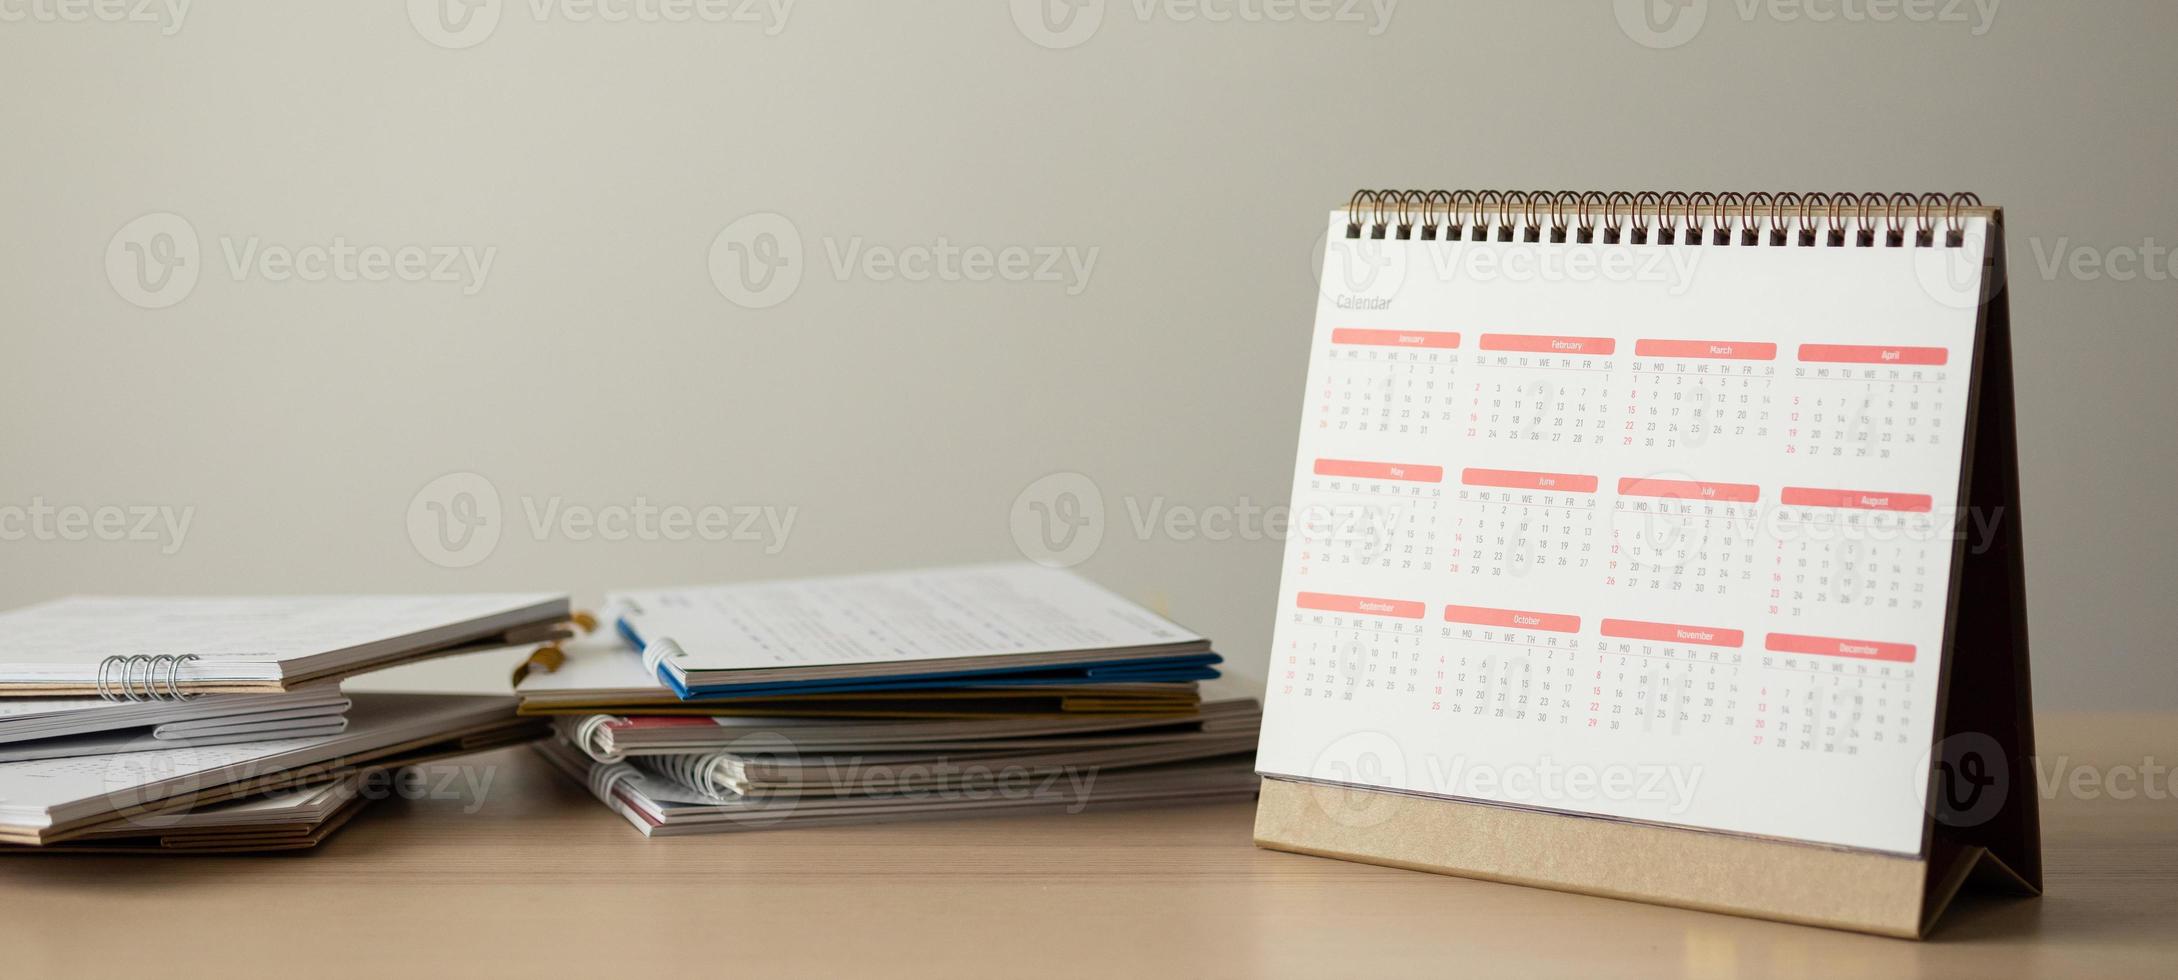 Calendar page close up on wood table with white wall background business planning appointment meeting concept photo